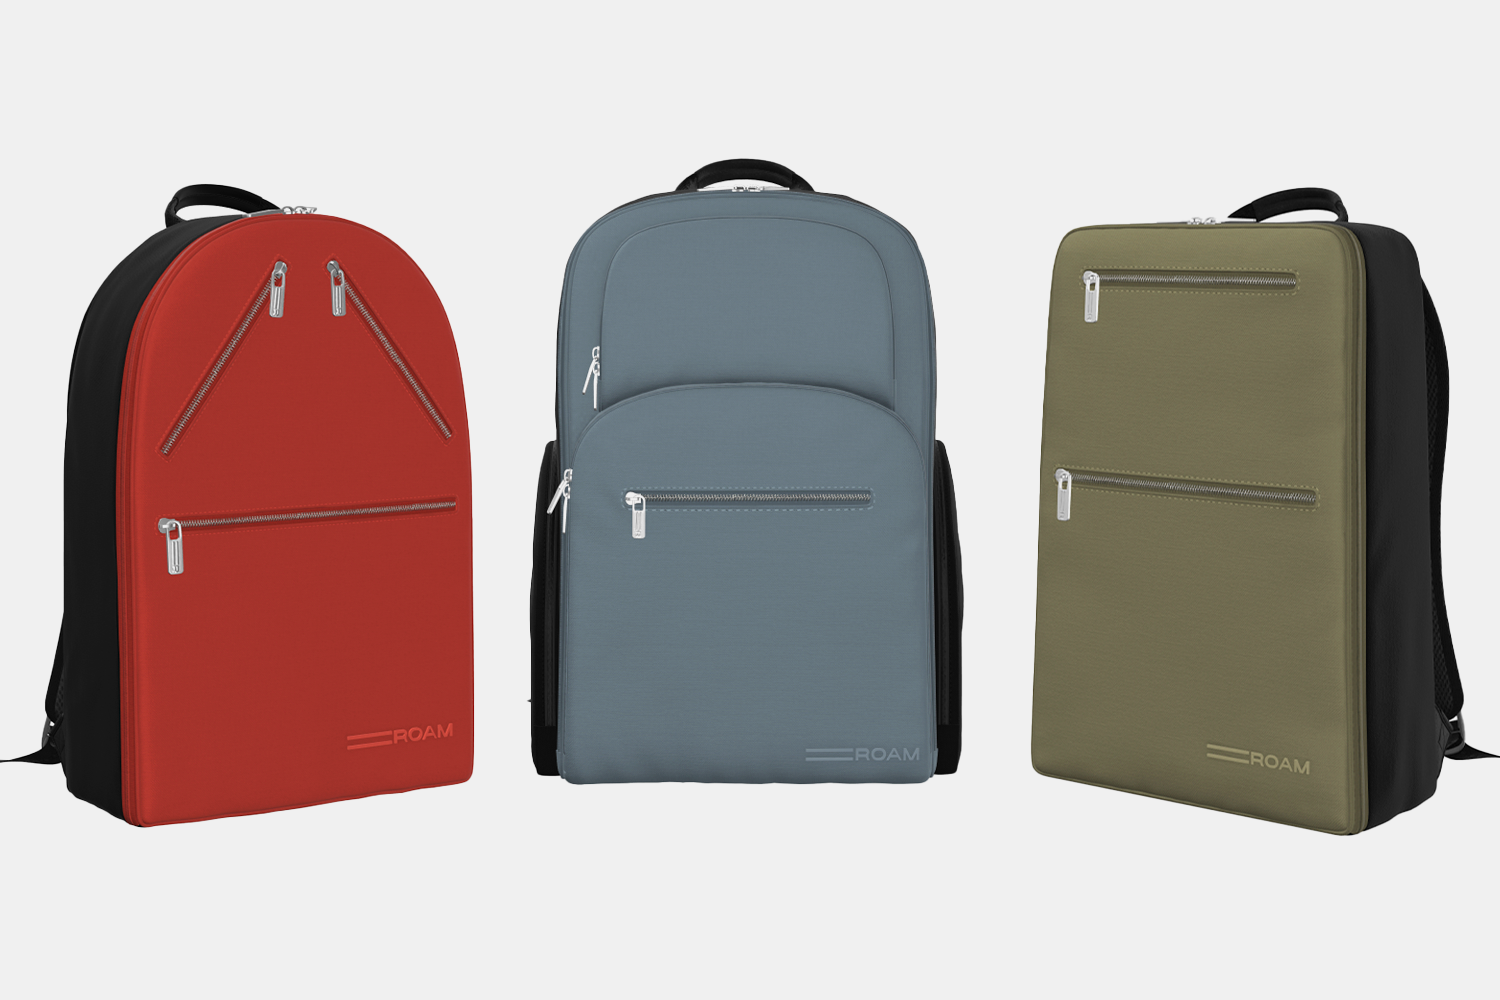 ROAM Suitcases Are Highly Customizable And Functional